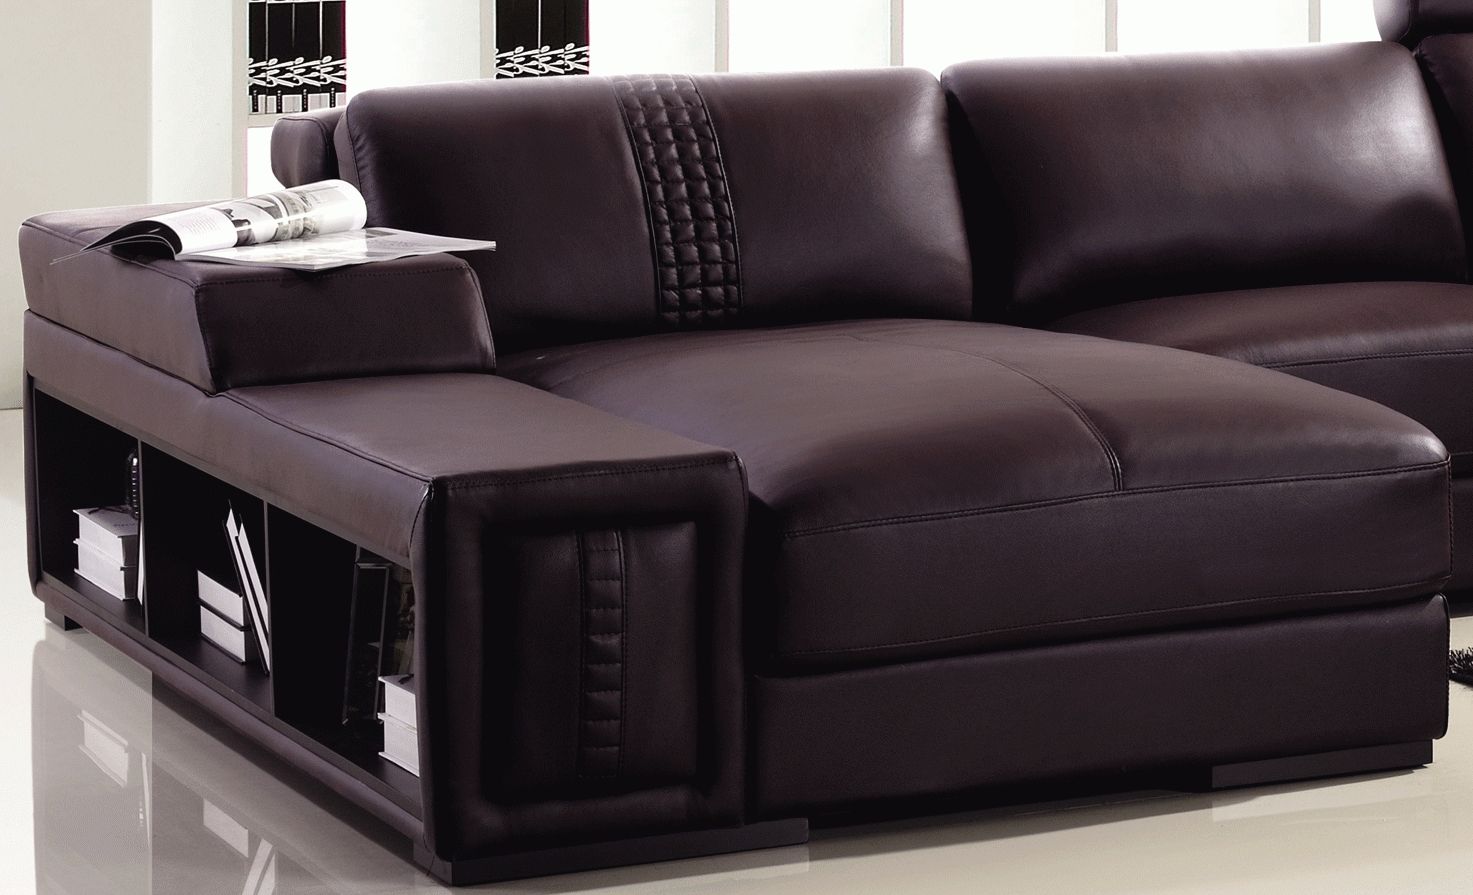 T132 Mini Modern Brown Leather Sectional Sofa Throughout Media Room Sectional Sofas (View 16 of 25)